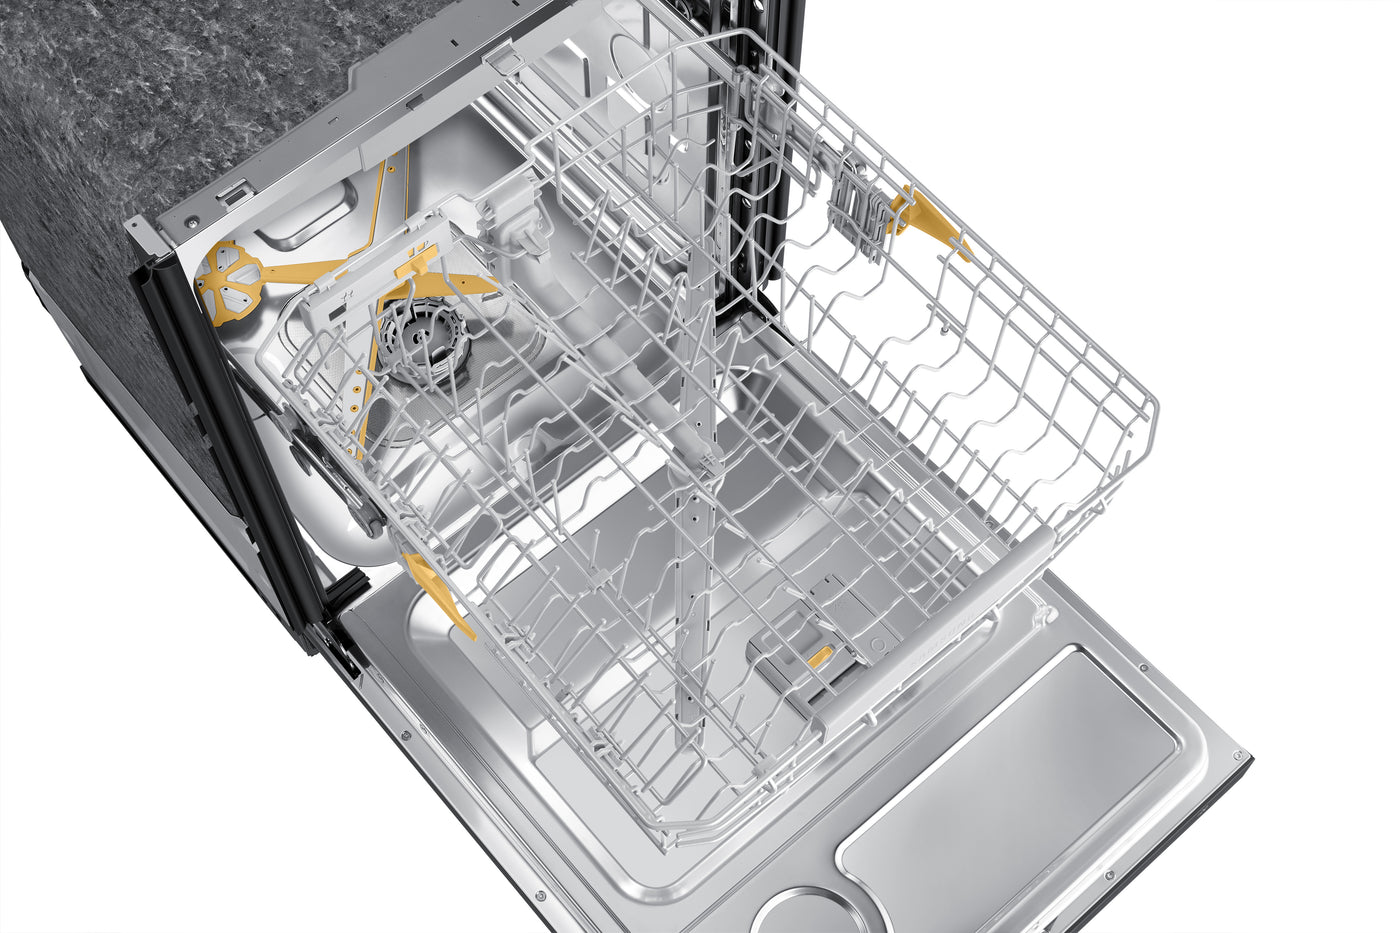 Samsung Black Stainless Built-In Dishwasher with AutoRelease - DW80B6060UG/AC